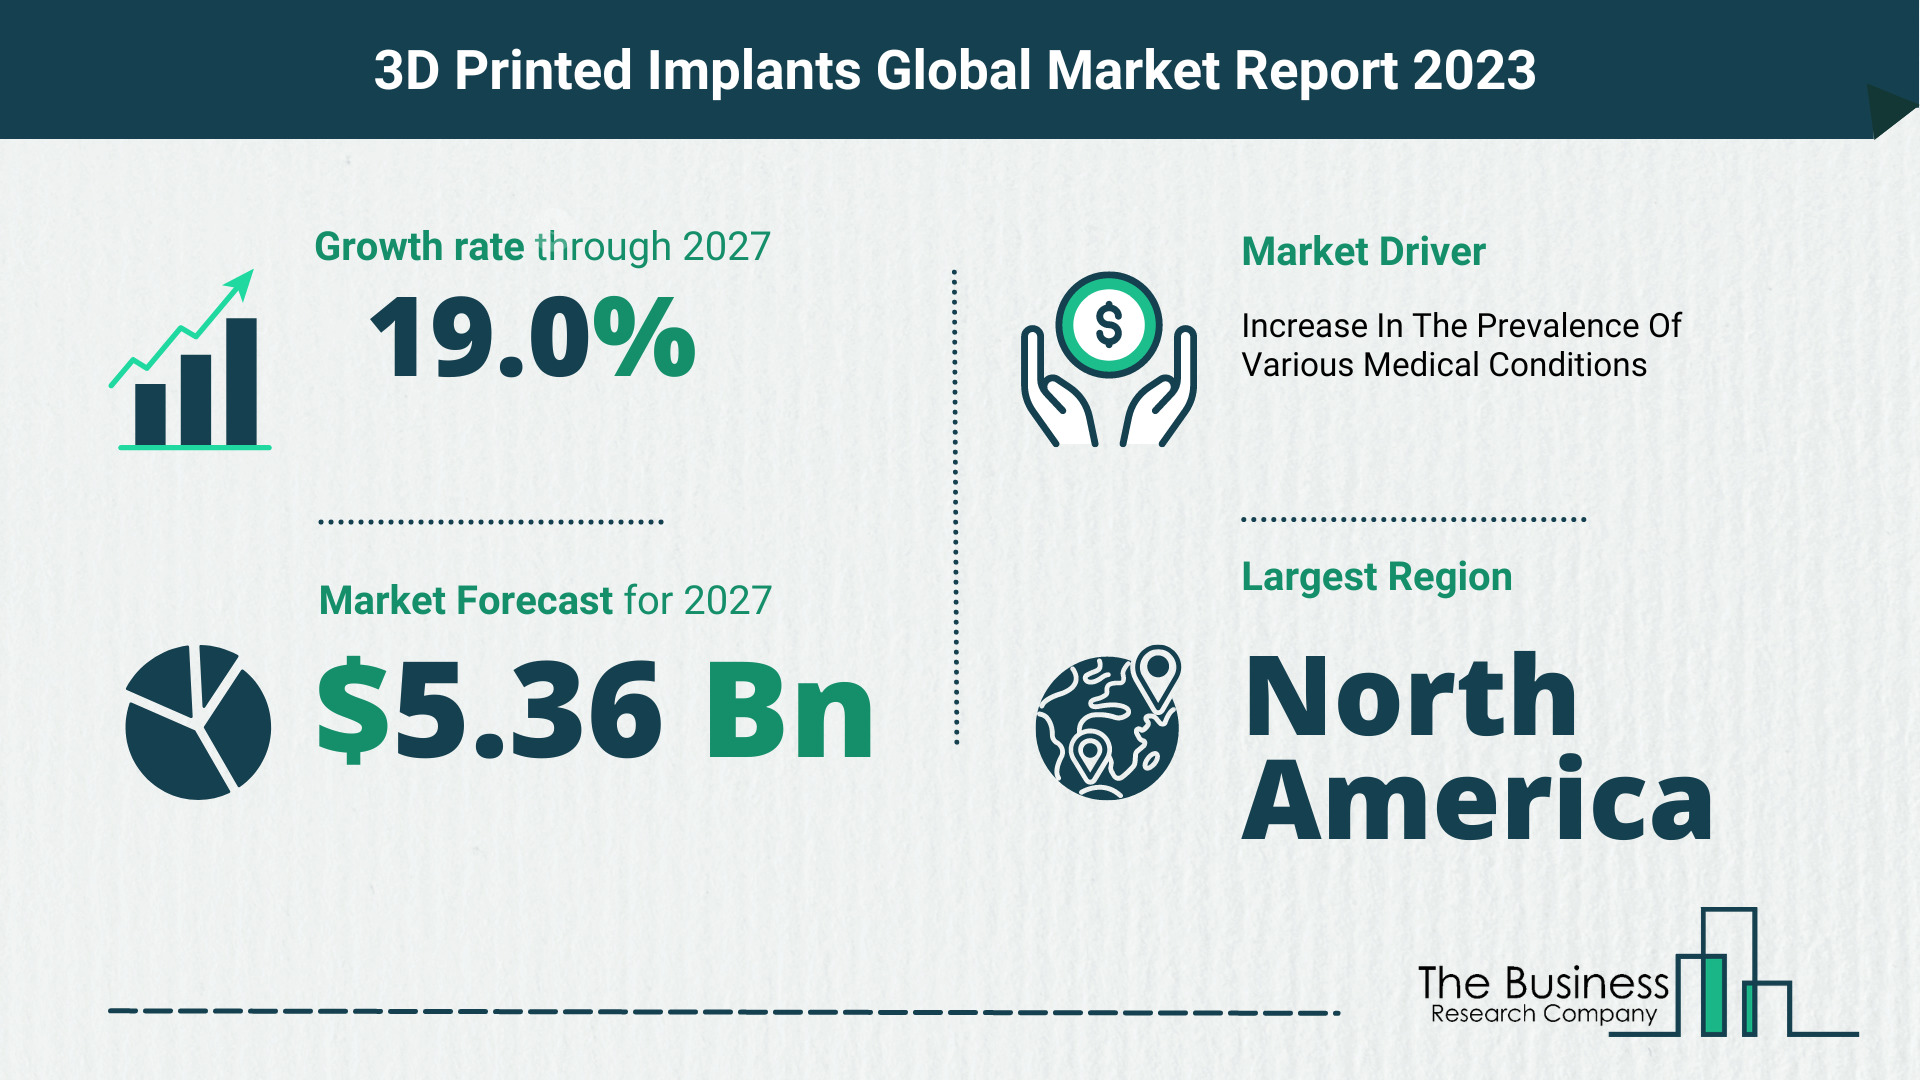 3D Printed Implants Market Size, Share, And Growth Rate Analysis 2023